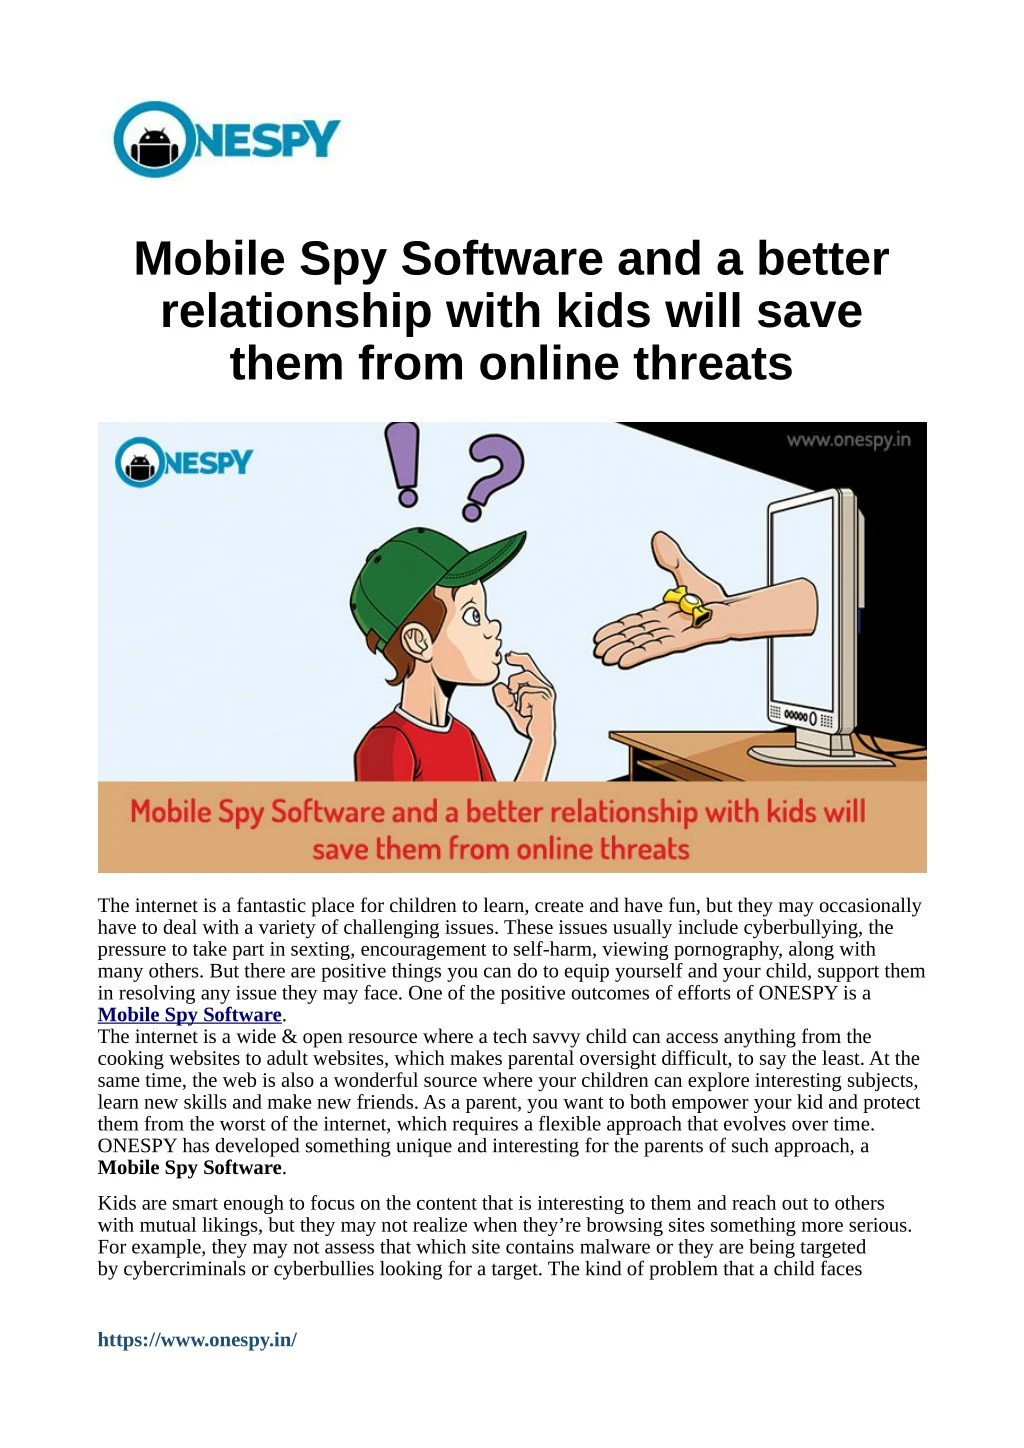 mobile spy software and a better relationship